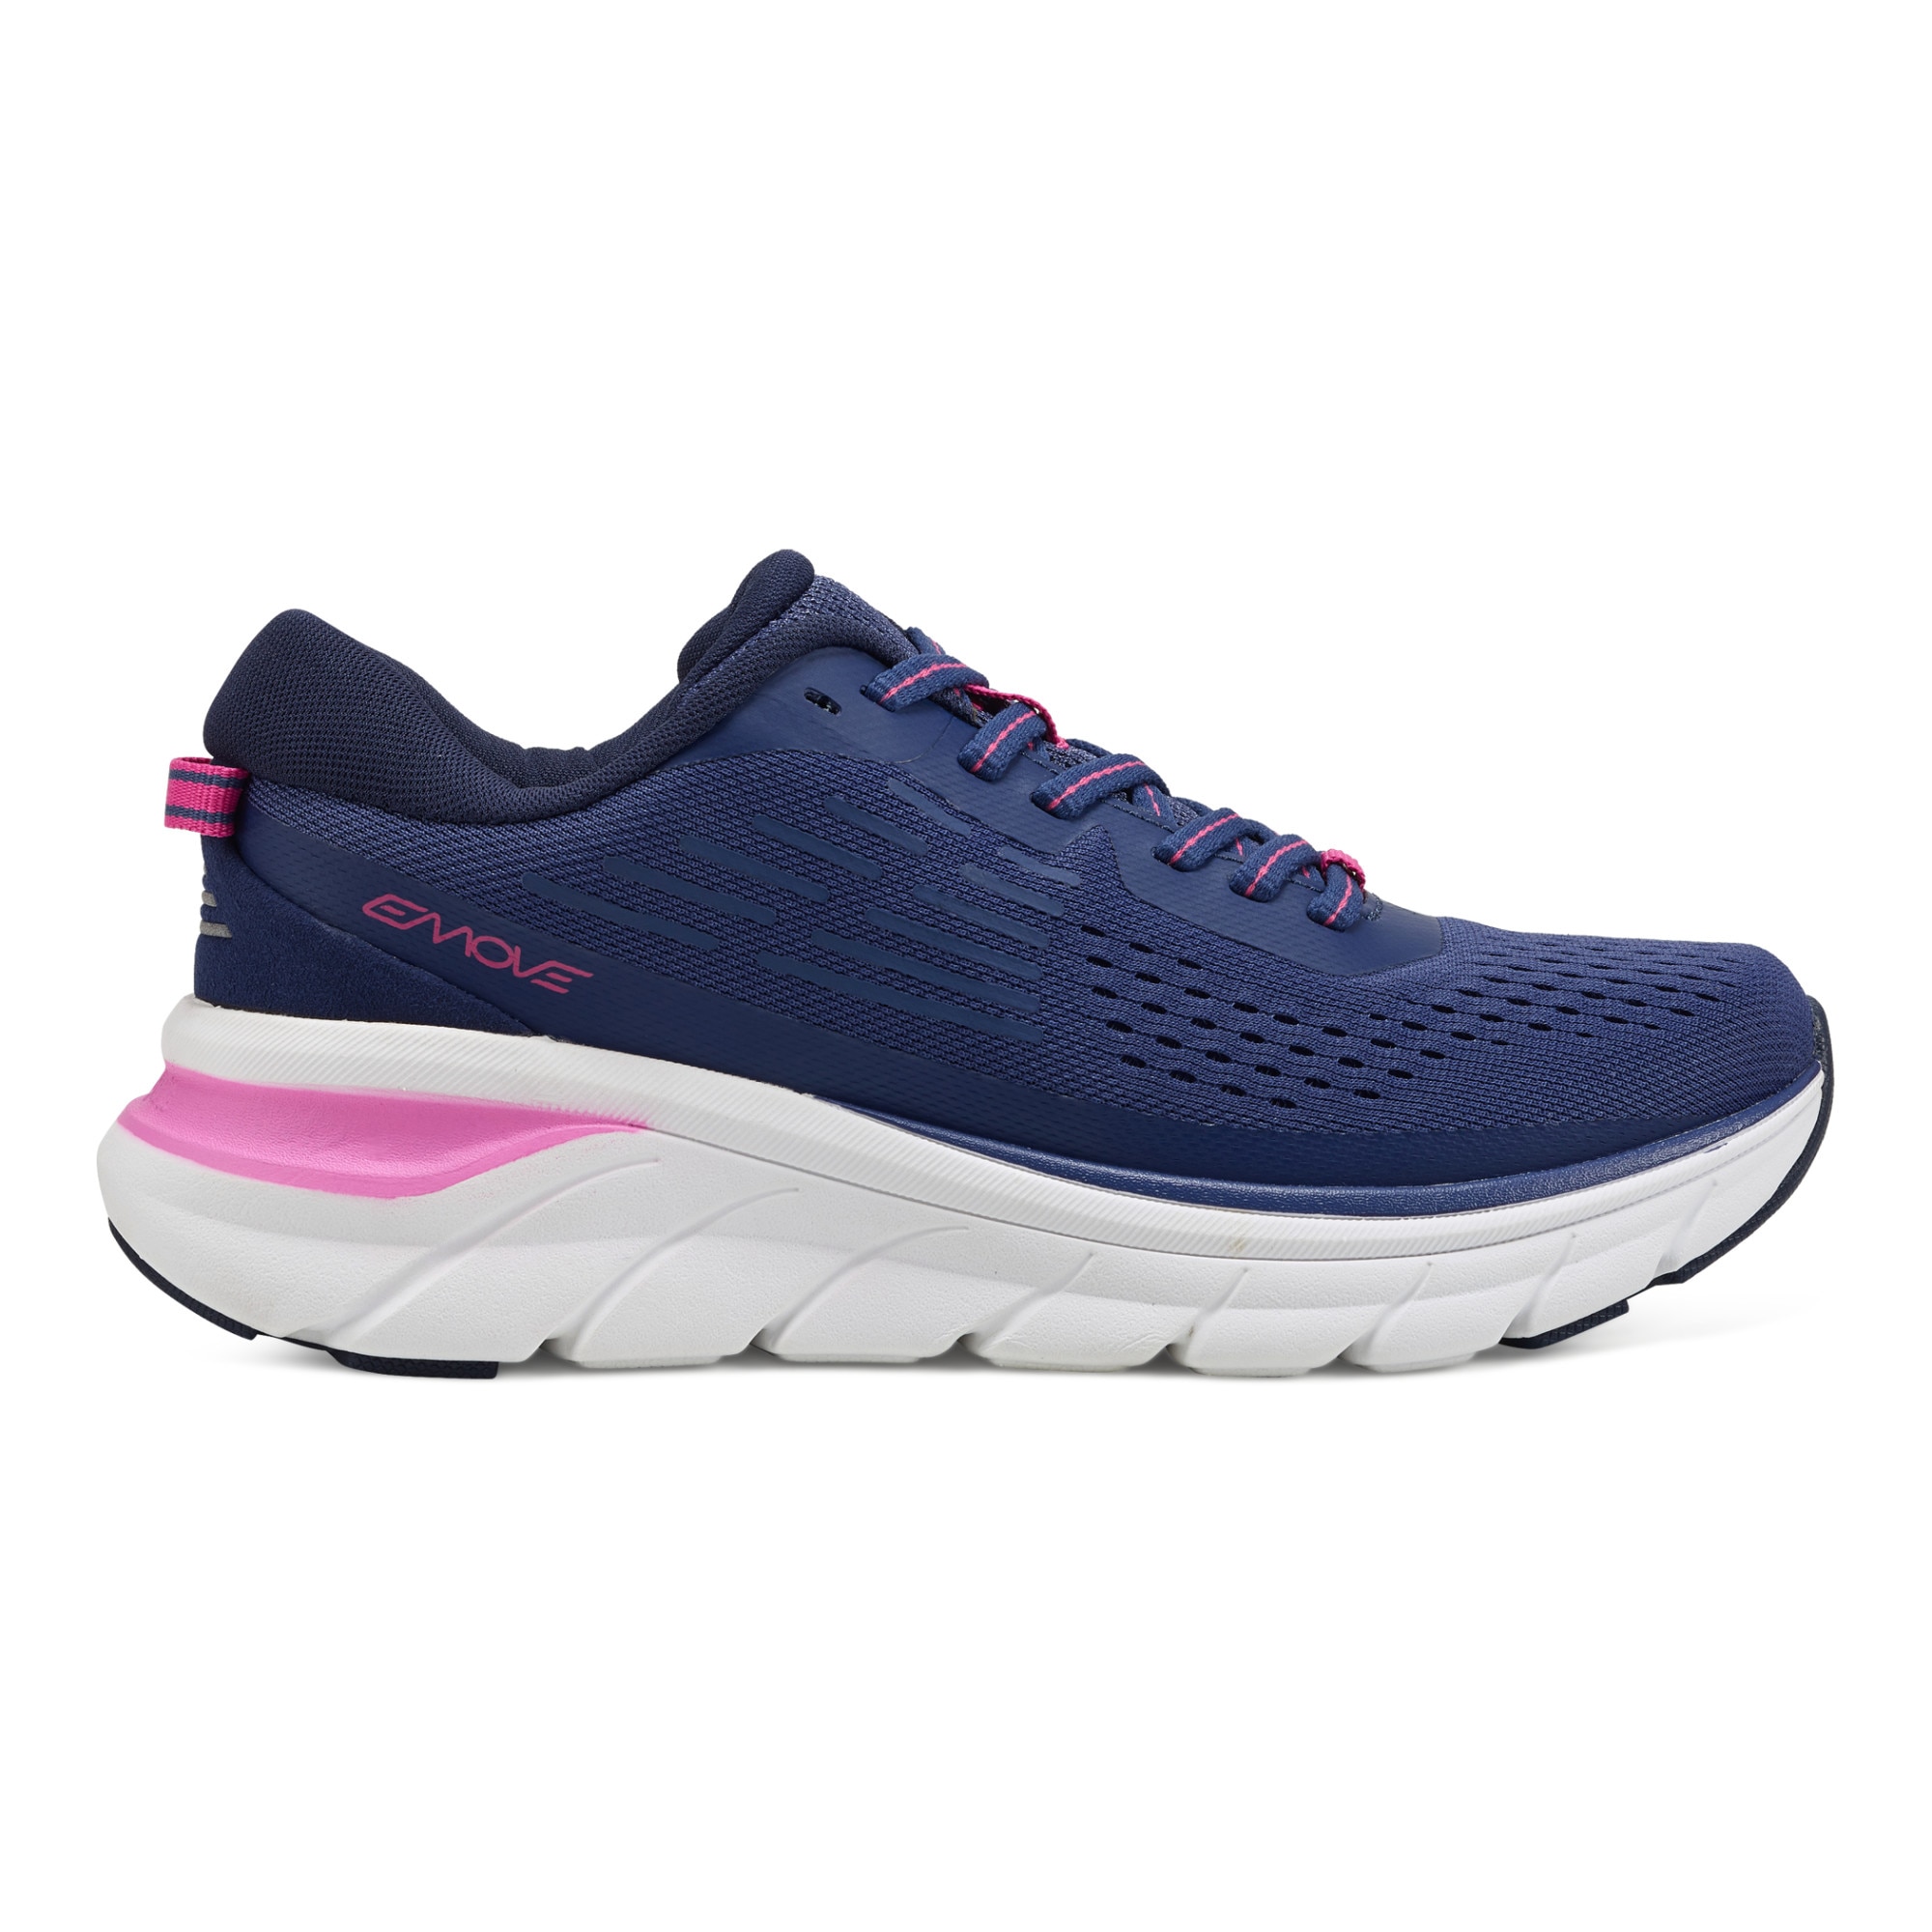 Clothing & Shoes - Shoes - Sneakers - Easy Spirit Mel2 Runner